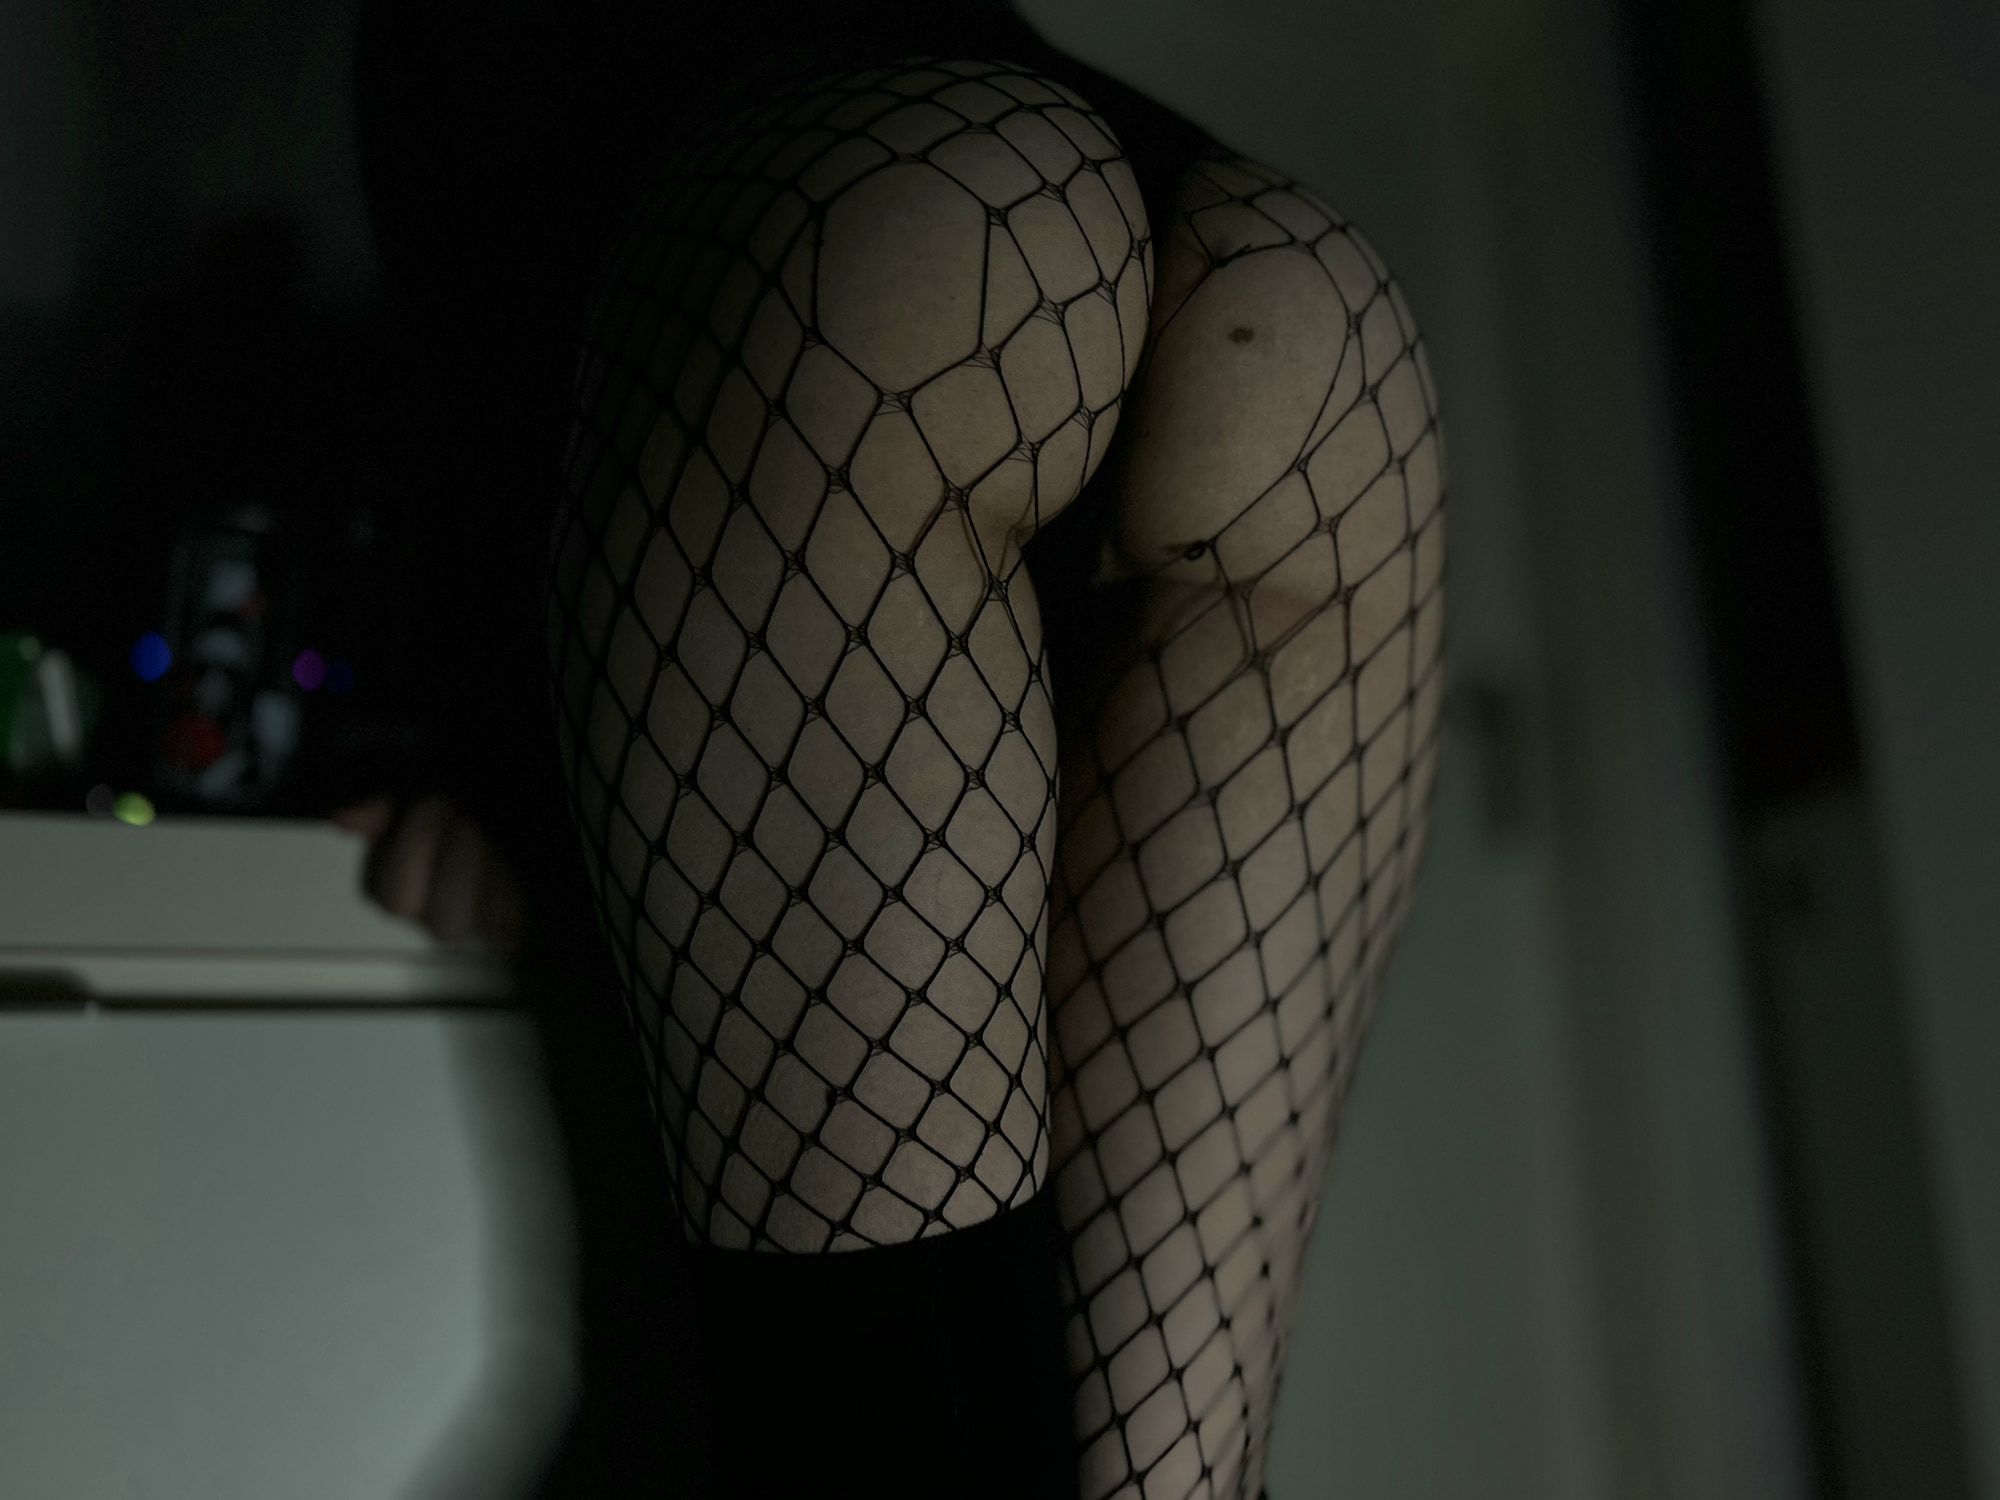 Big White ass in FIshnet #2